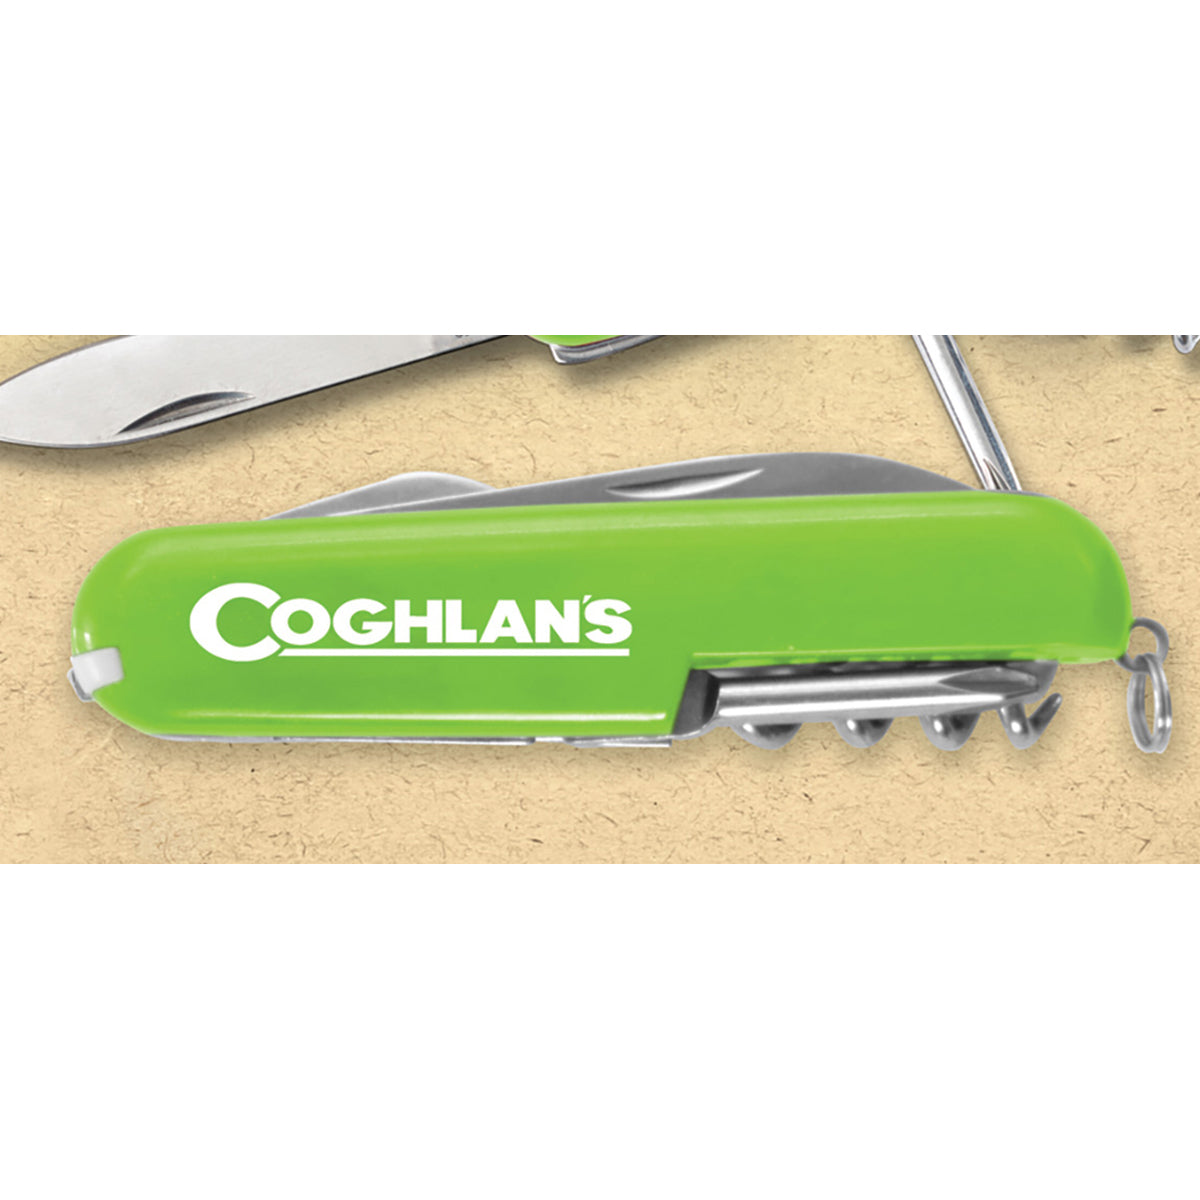 Coghlan's Multi-Function Camp Knife, 7 Functions, Army Camping Swiss Style Coghlan's